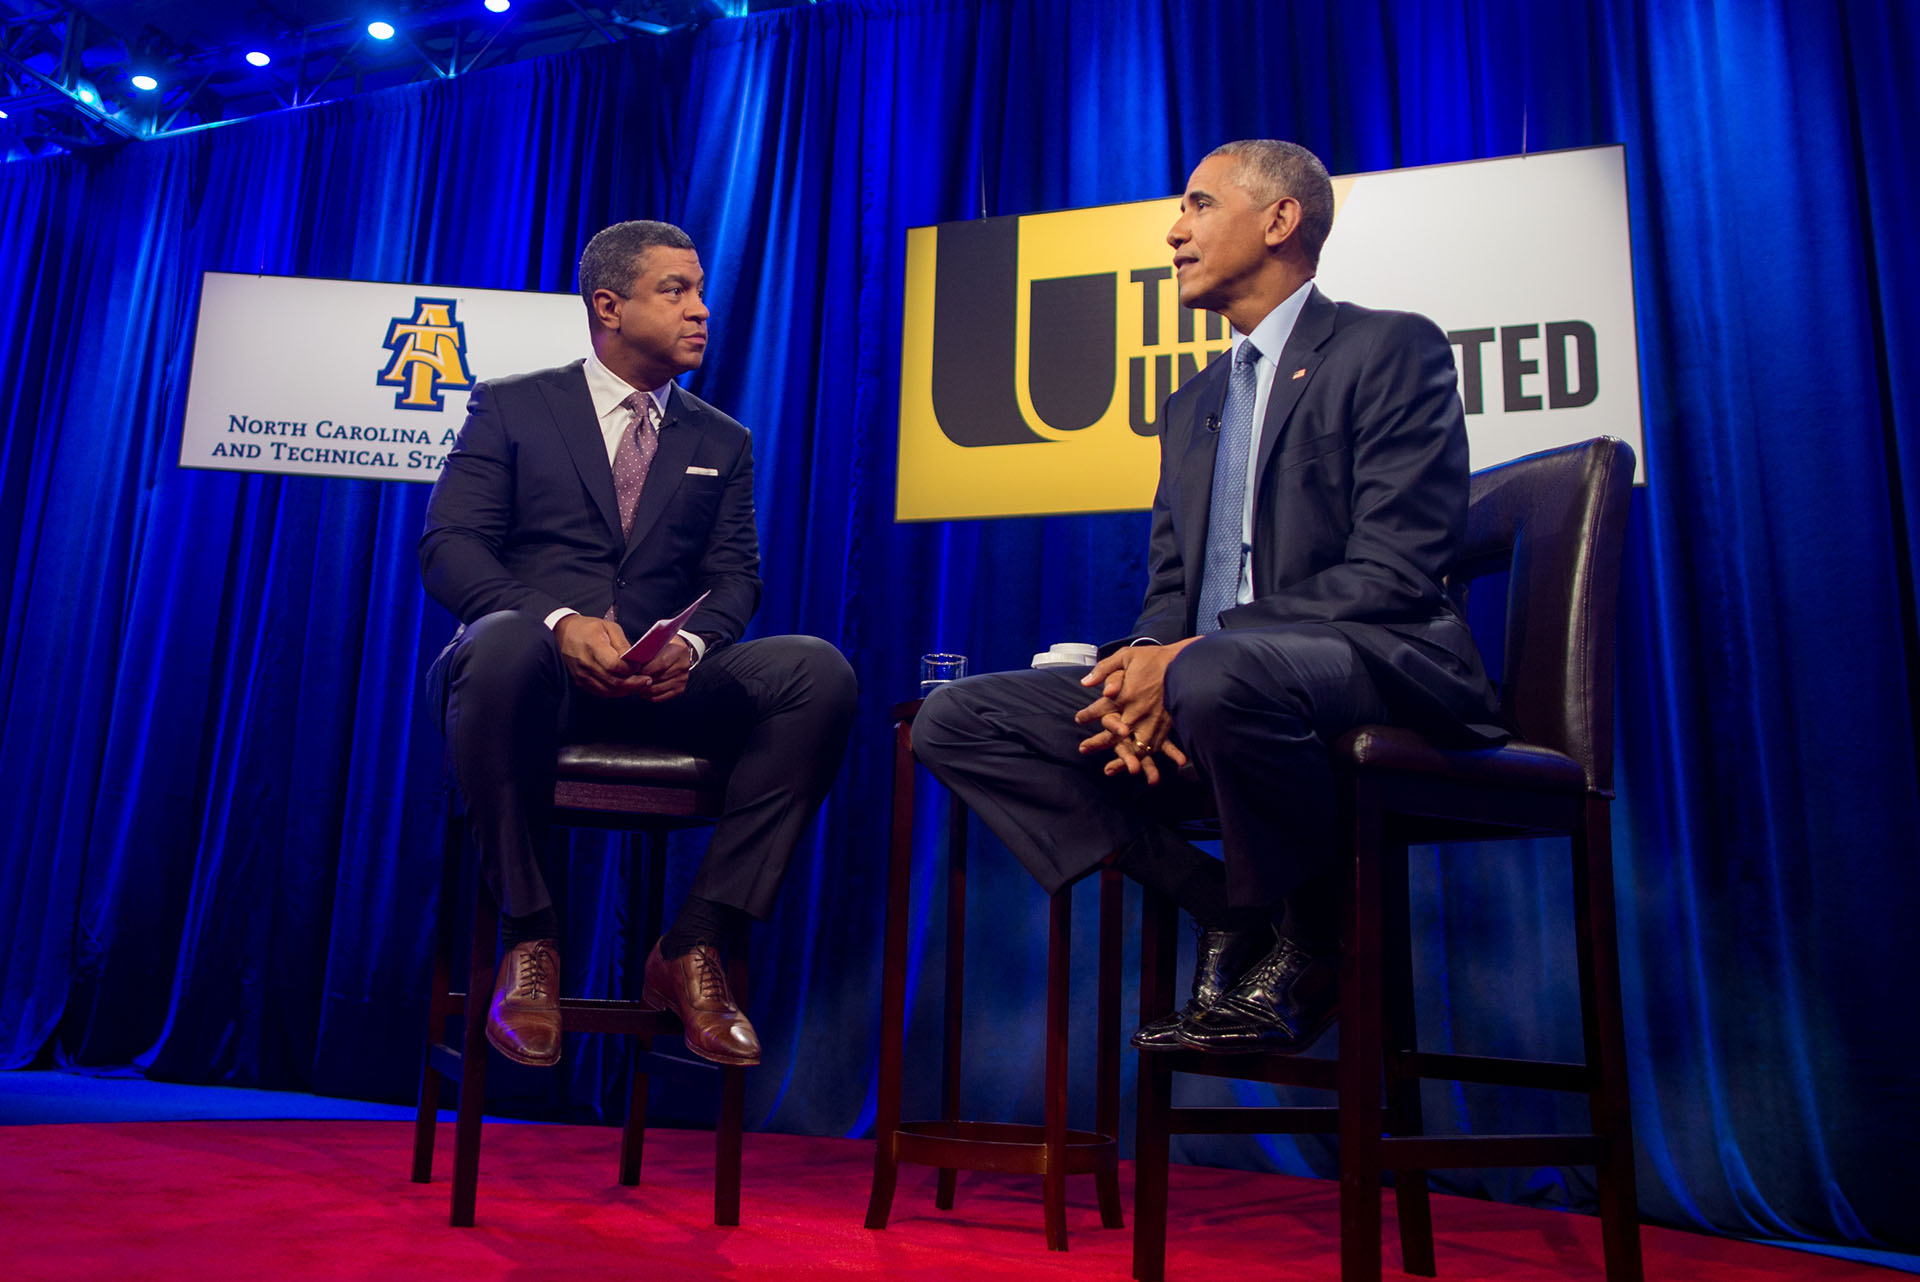 President Obama at his 2016 Town Hall at A&T